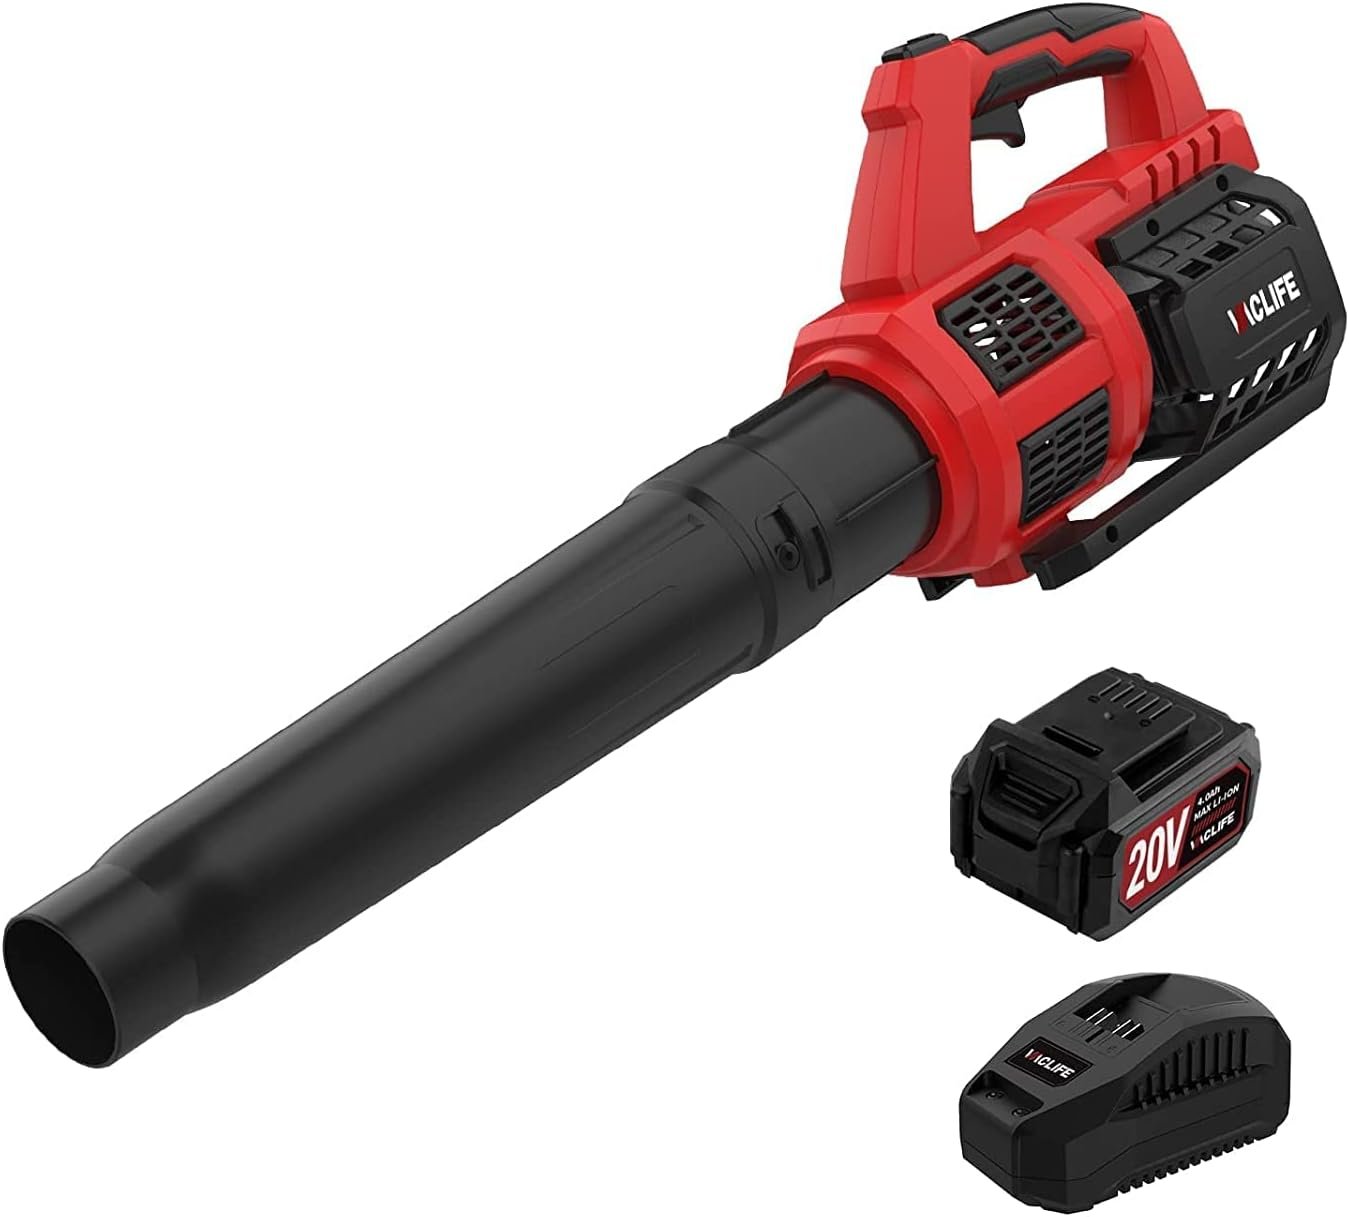 VacLife Leaf Blower Cordless with Battery and Charger Review